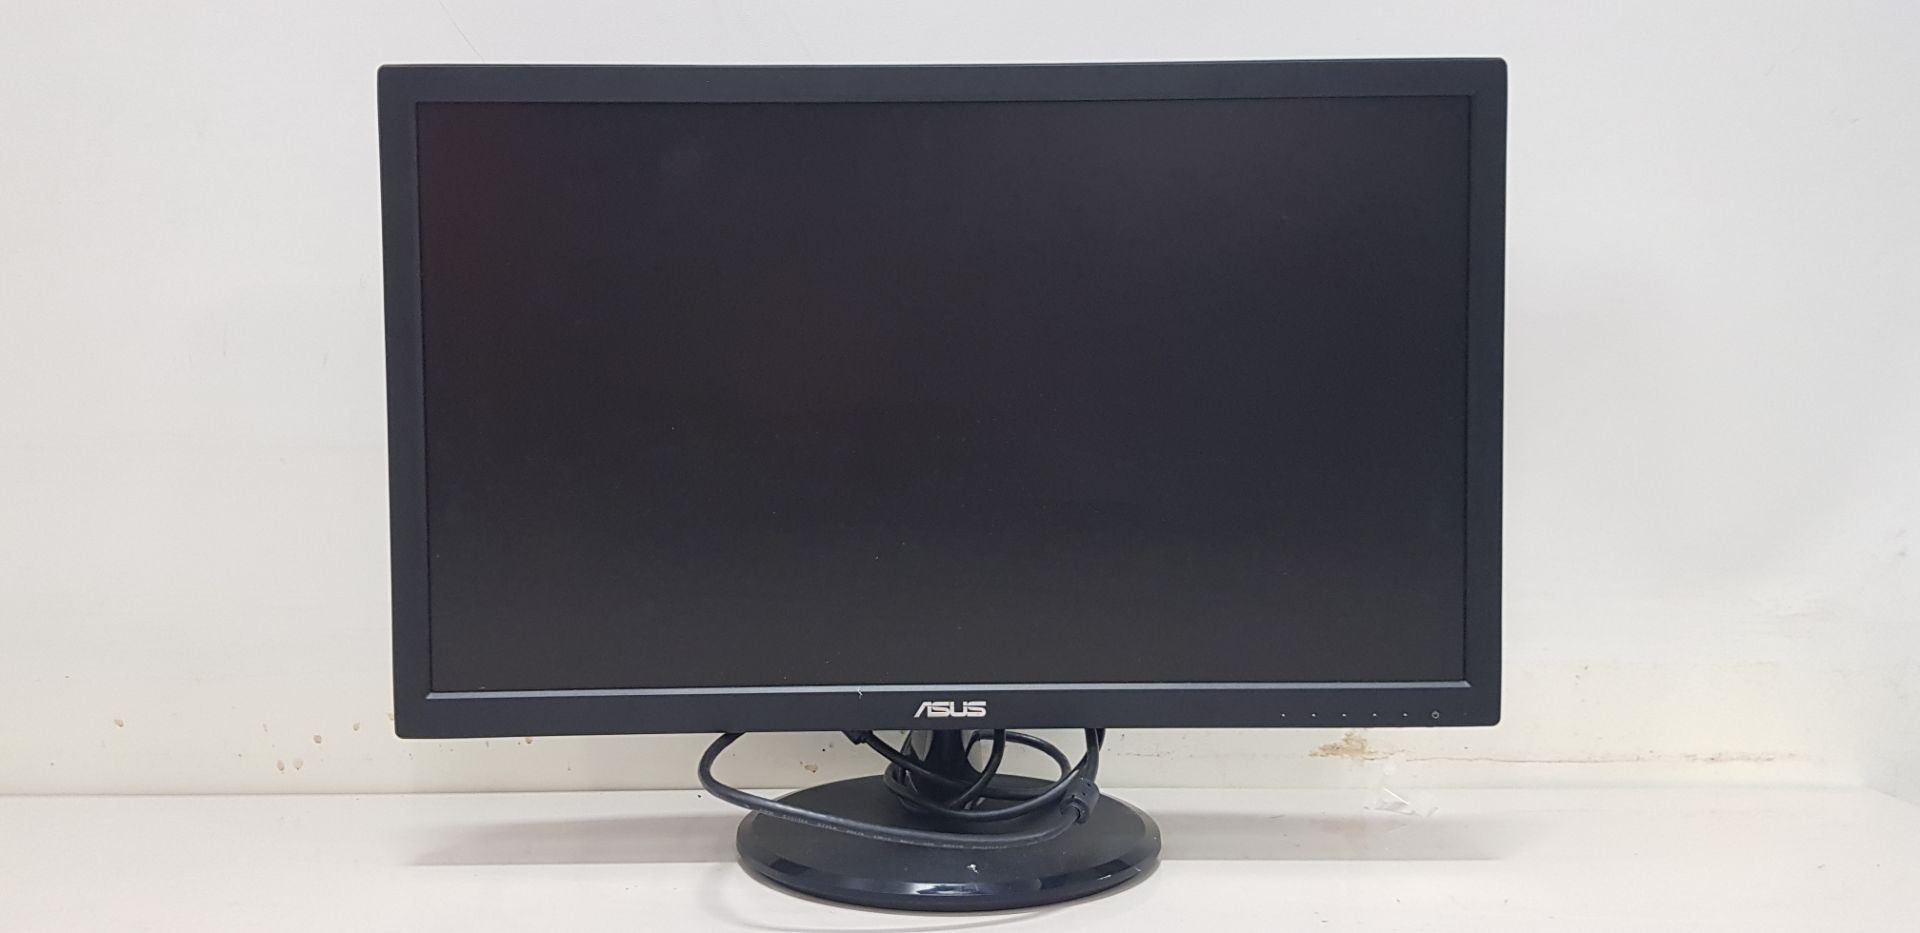 5 X ASUS 21.5 LCD MONITORS WITH POWER LEADS MODEL NUMBER VP228